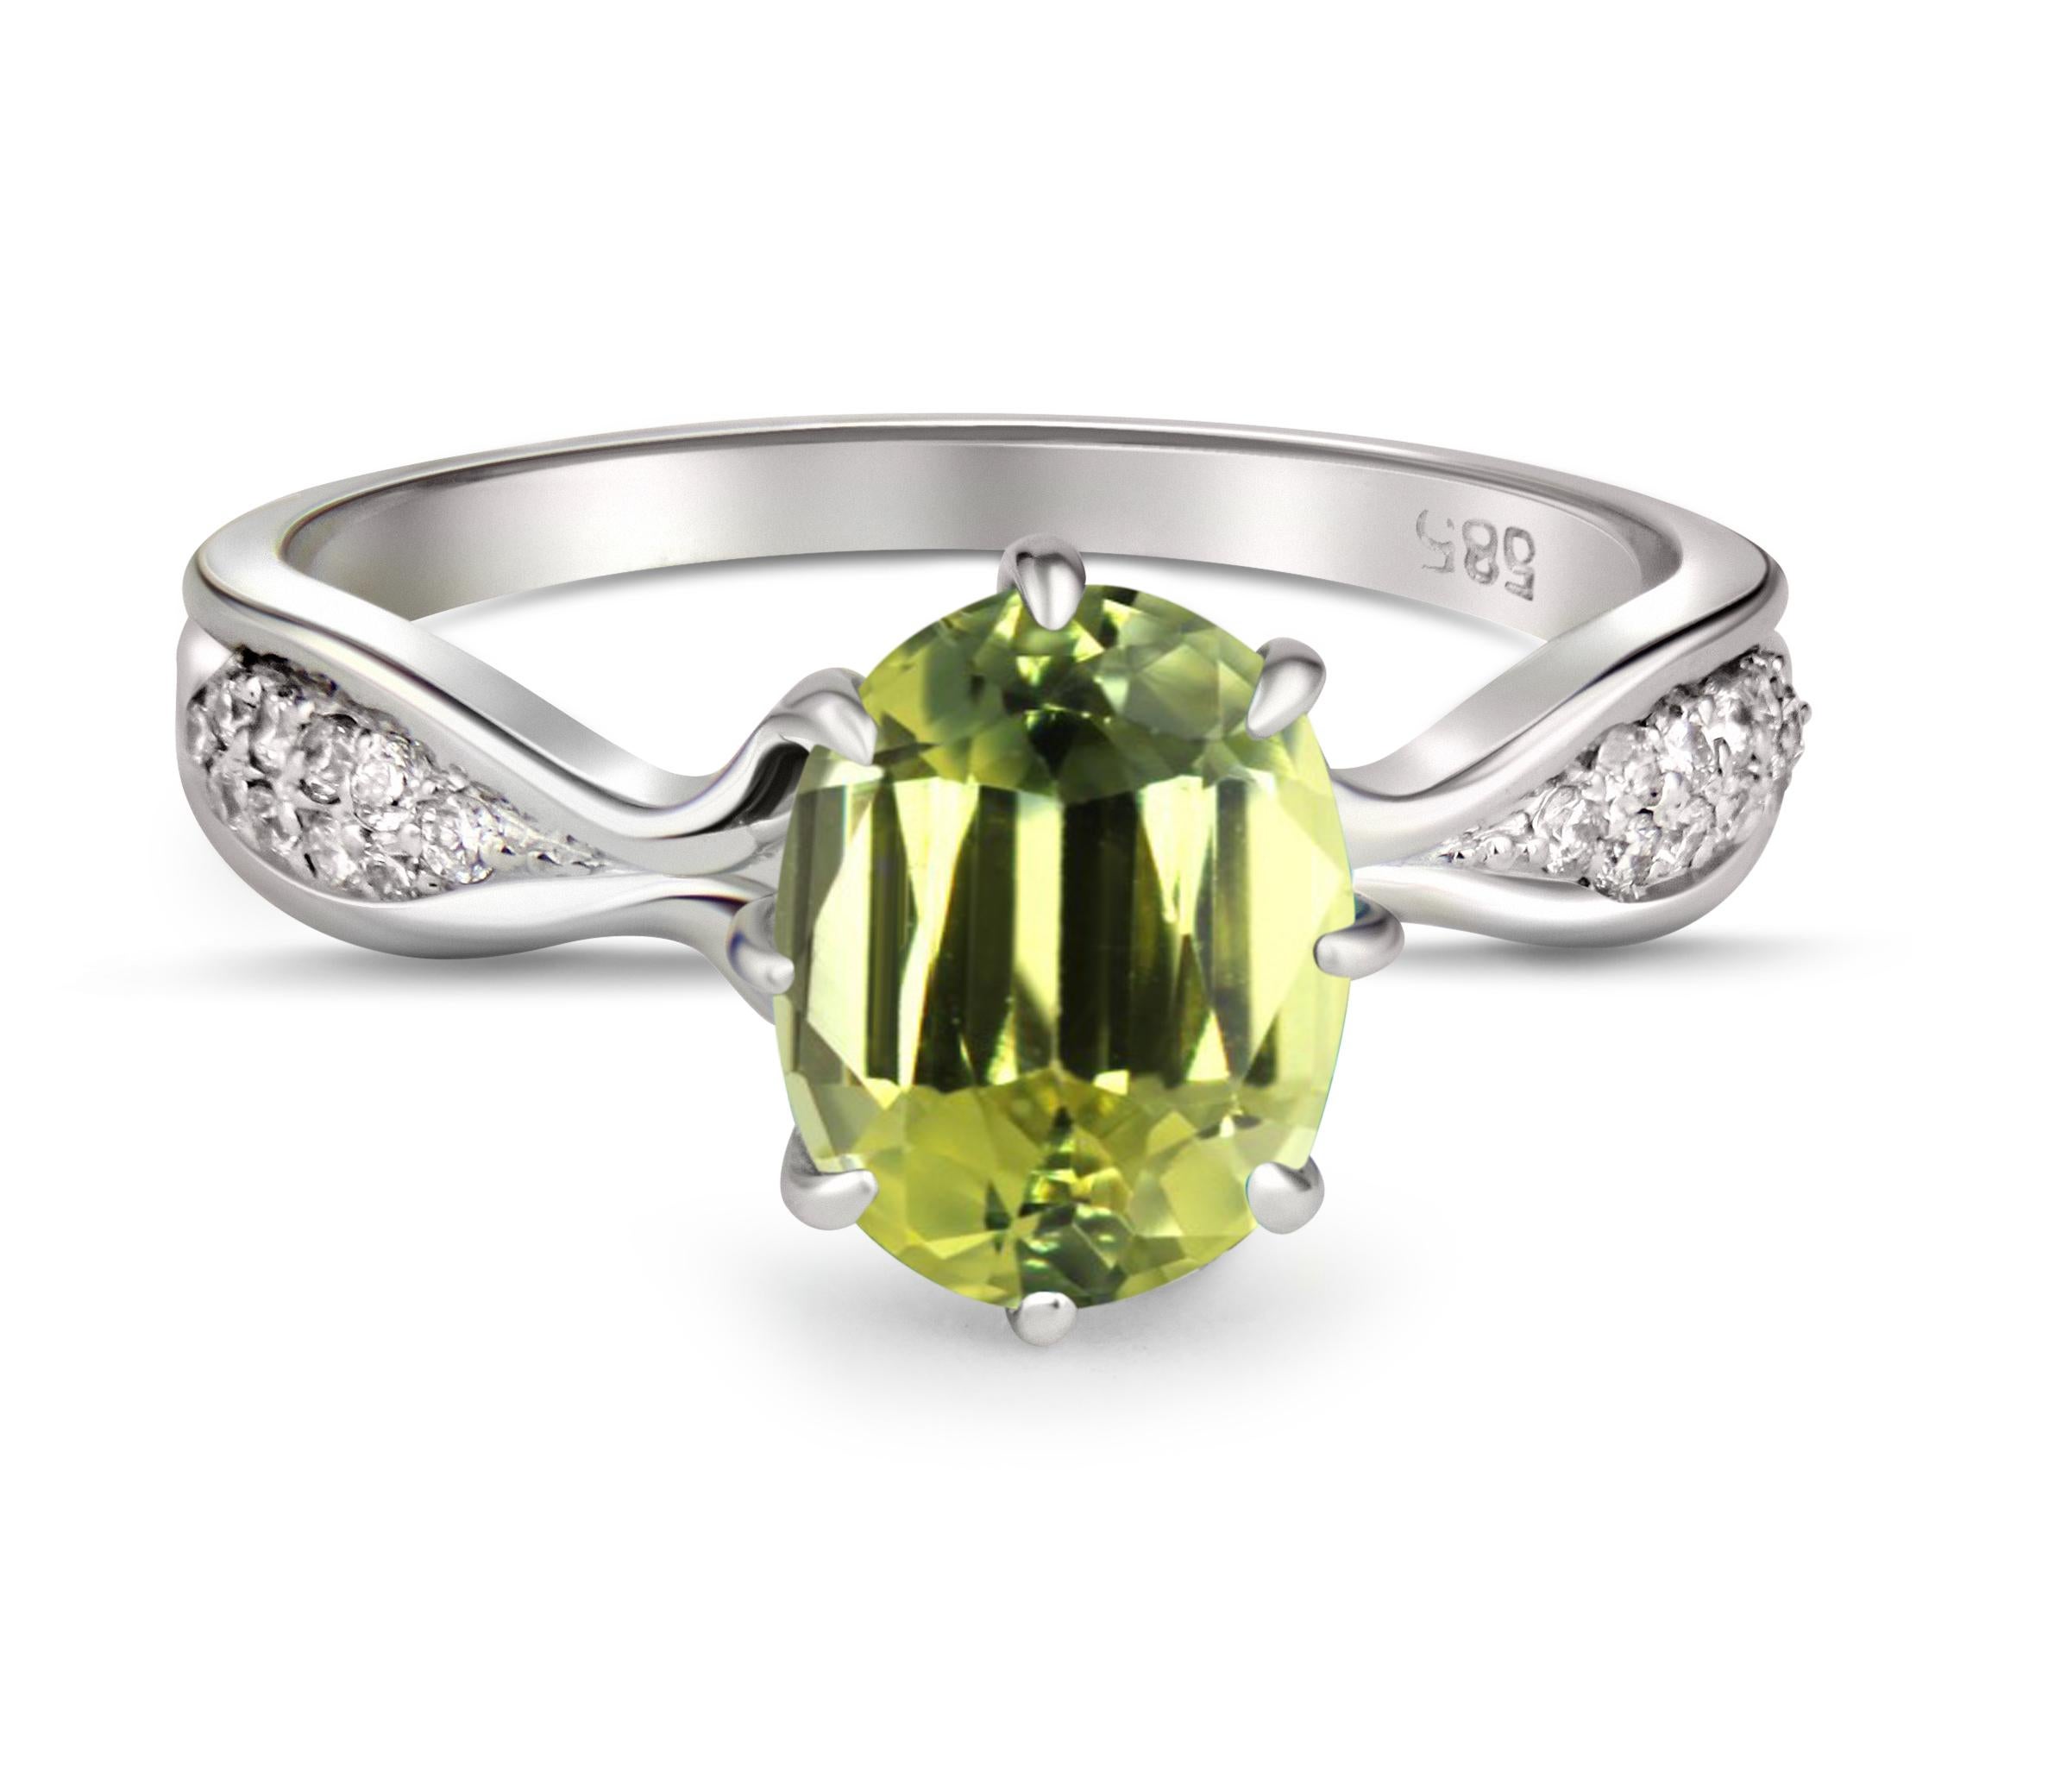 Oval peridot ring. 
14k gold ring with Peridot. Minimalist peridot ring. Peridot engagement ring. Peridot promise ring.
 
Metal: 14k solid gold
Weight: 2.1 g (depends from size).

Main stone - peridot, apple green color, oval cut, 1 ct weight, vs